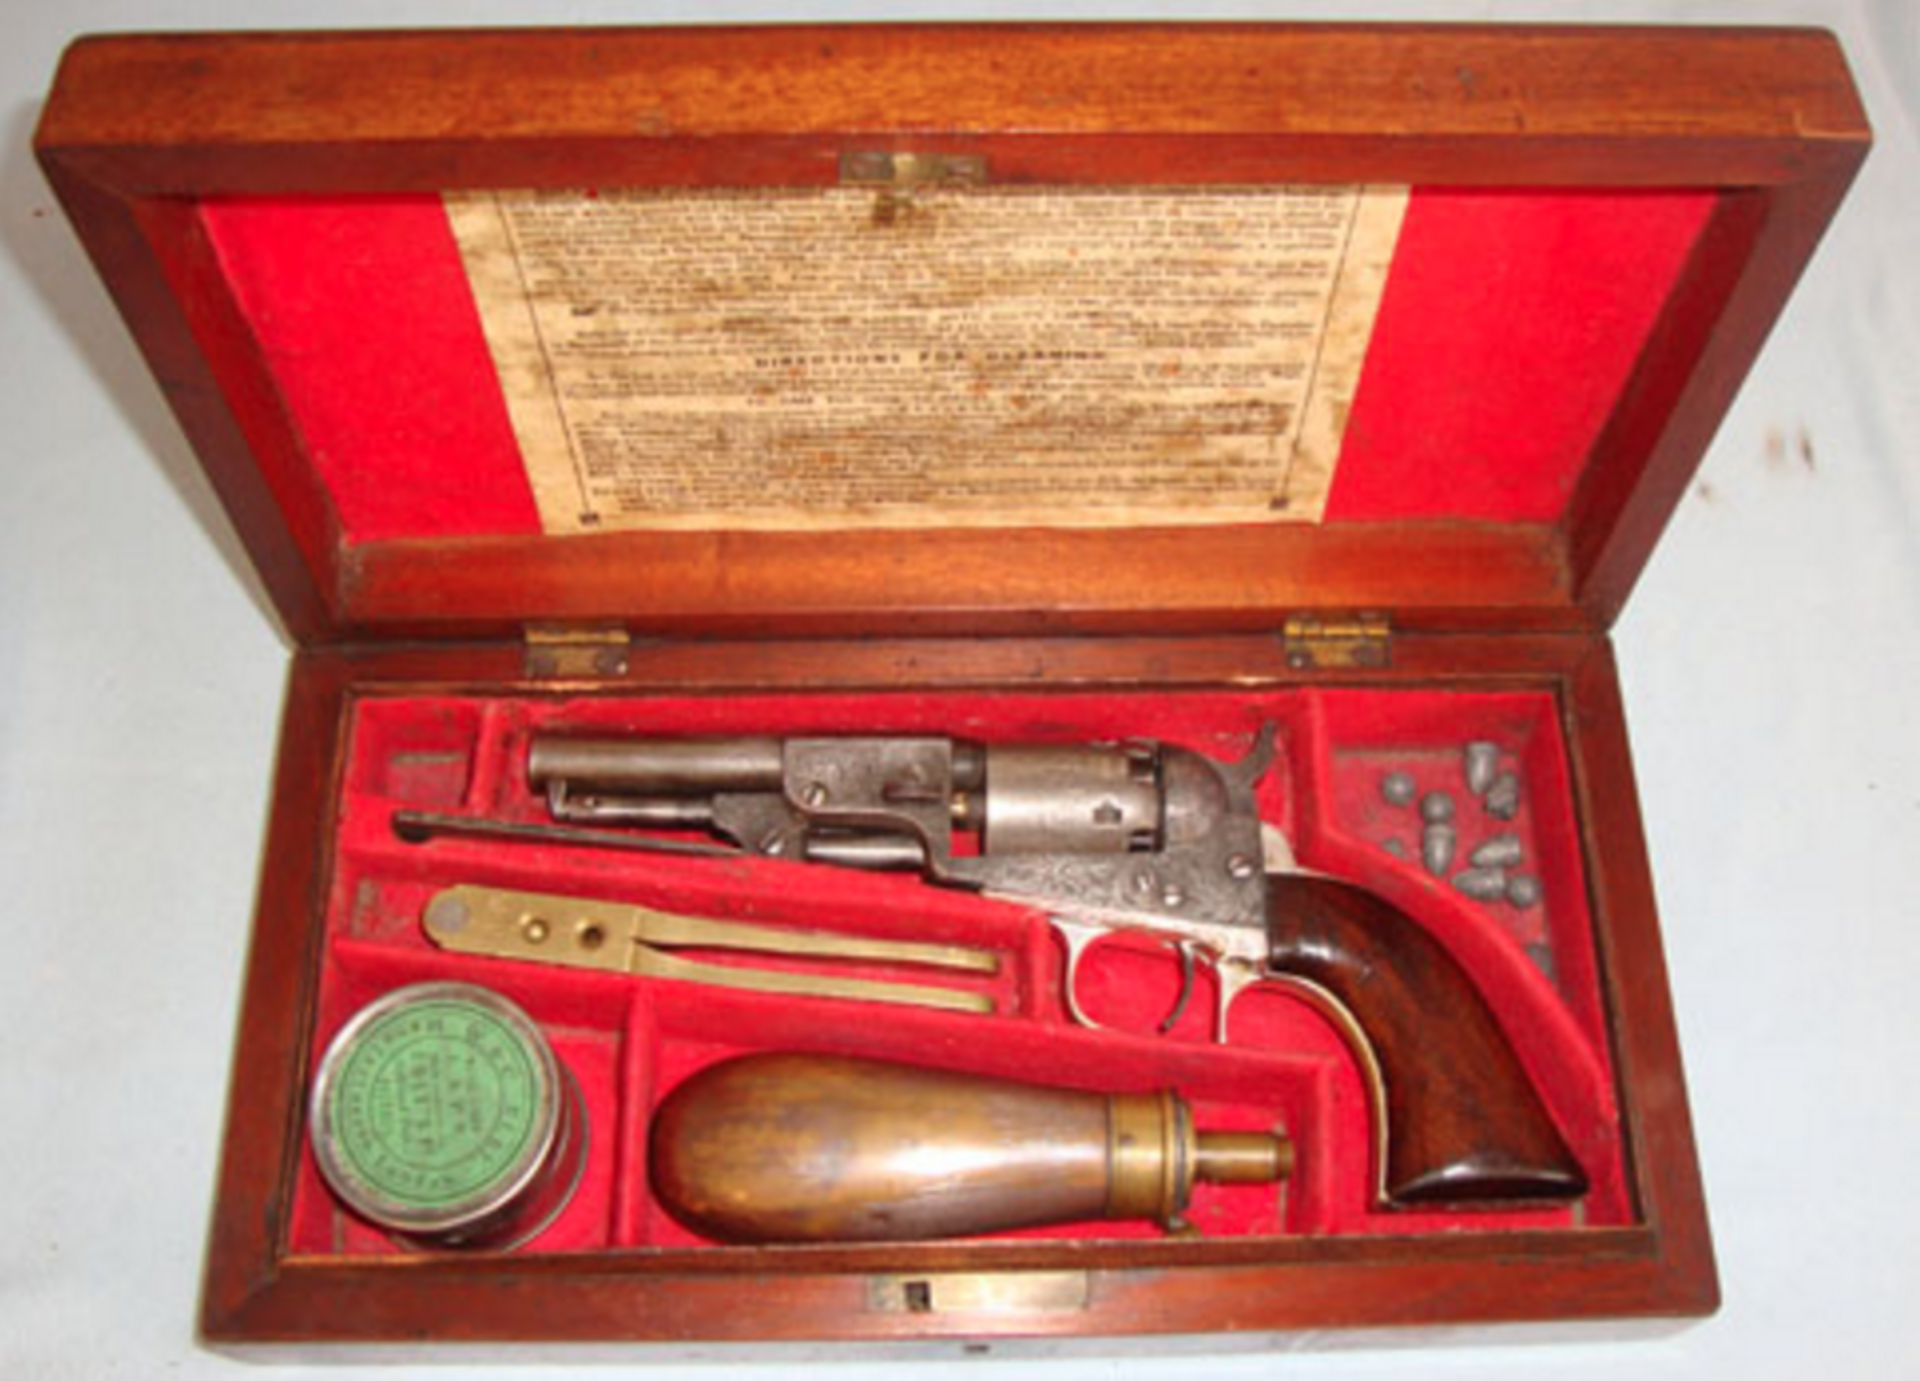 ORIGINAL ALL MATCHING NUMBERS INCLUDING CYLINDER, 1853, Cased, Ornately Factory Engraved Colt.31 Cal